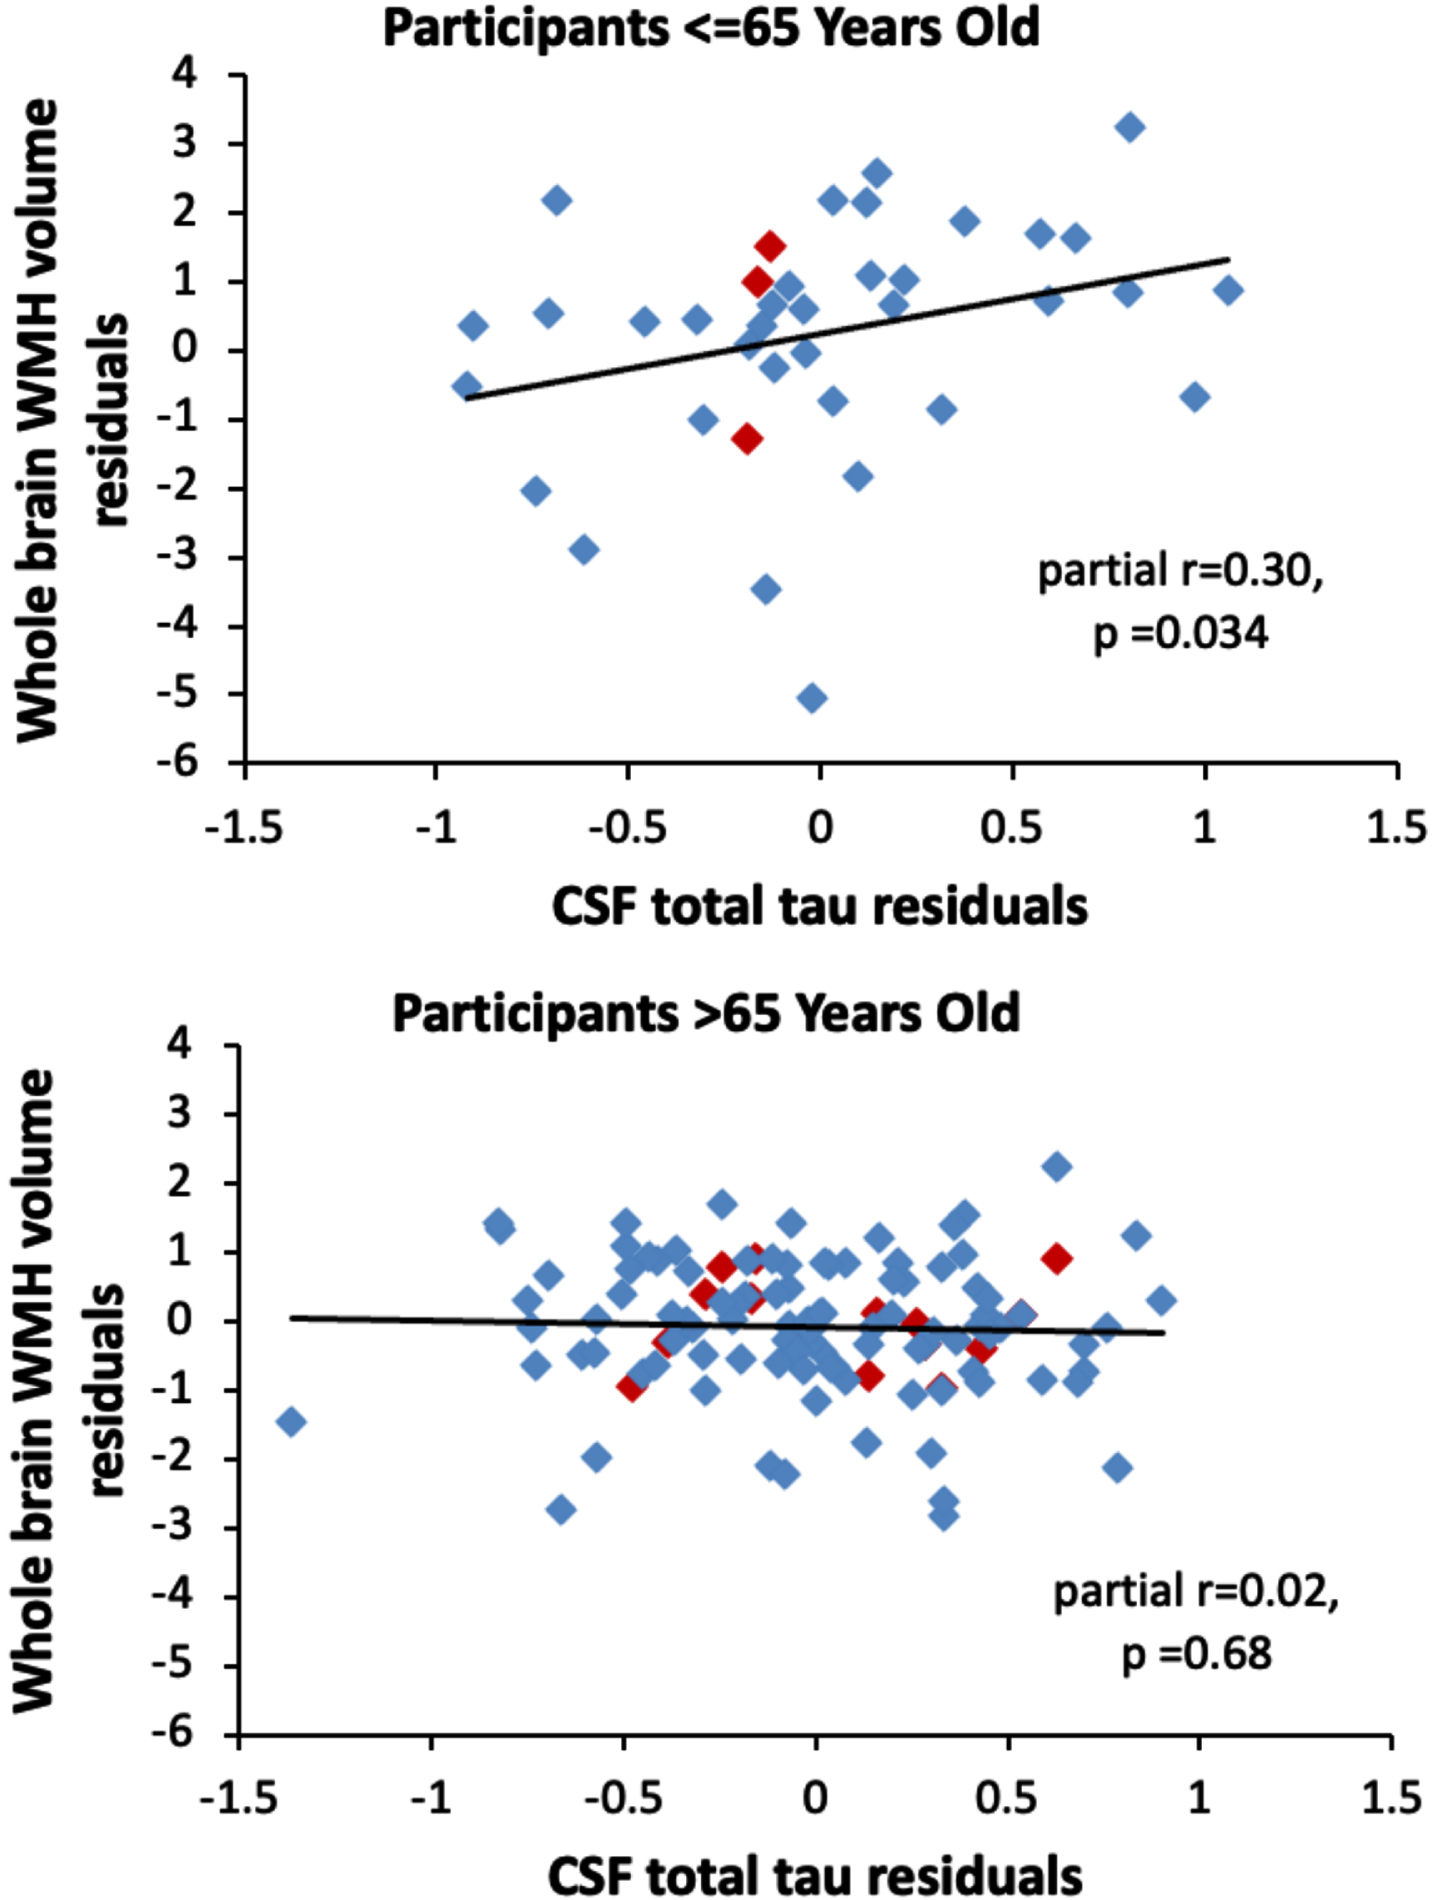 Scatterplots showing the partial correlations between global white matter hyperintensity volumes (y-axis) and CSF total tau levels (x-axis) for participants aged 65 years or younger (top panel) and participants older than 65 years (bottom panel). Correlations are adjusted for age, sex, years of education, diagnostic status, APOE ɛ 4 genetic status, and summary vascular risk scores. Participants with a diagnosis of MCI are shown red (◊); participants with normal cognition are shown in blue (◊).